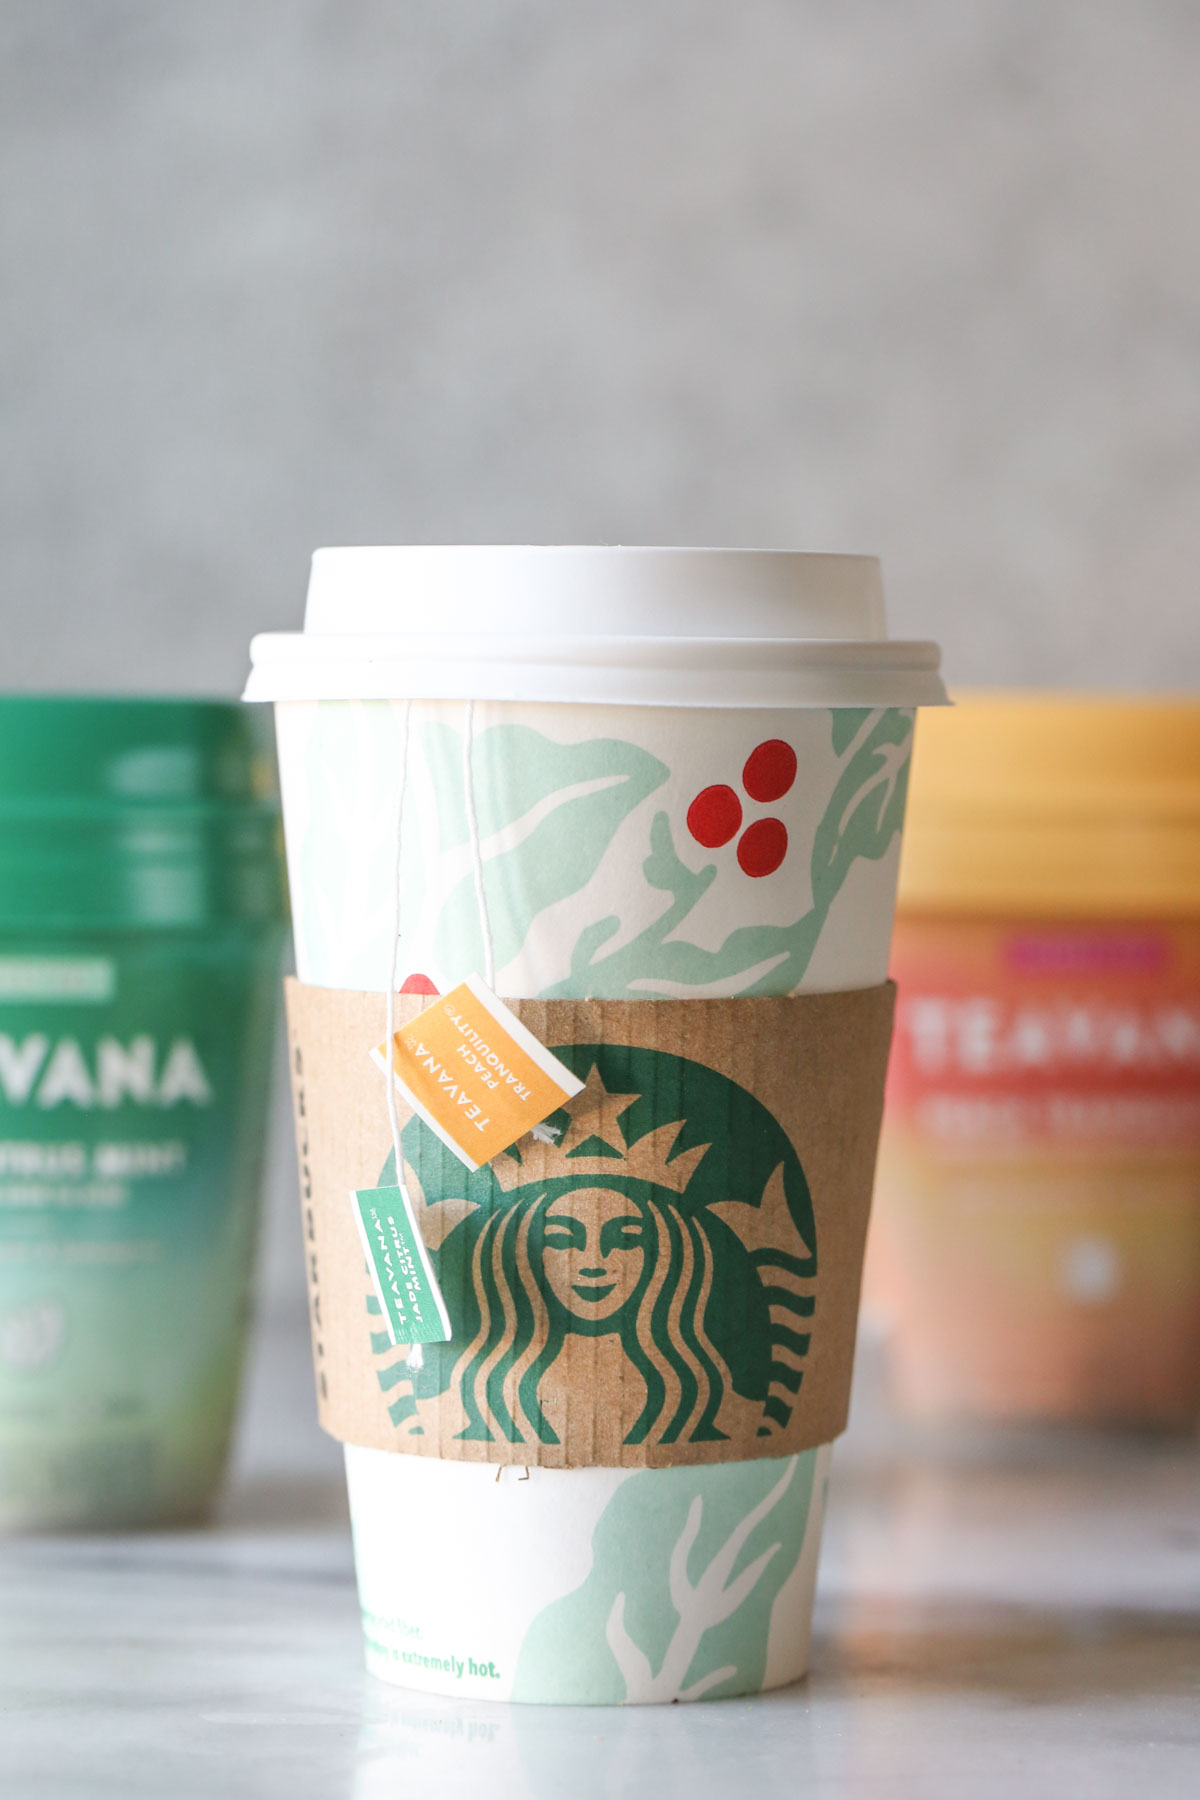 A Starbucks Medicine Ball Tea in a Starbucks hot cup, with the tea bag labels hanging over the side, and the Teavana tea packages in the background.  